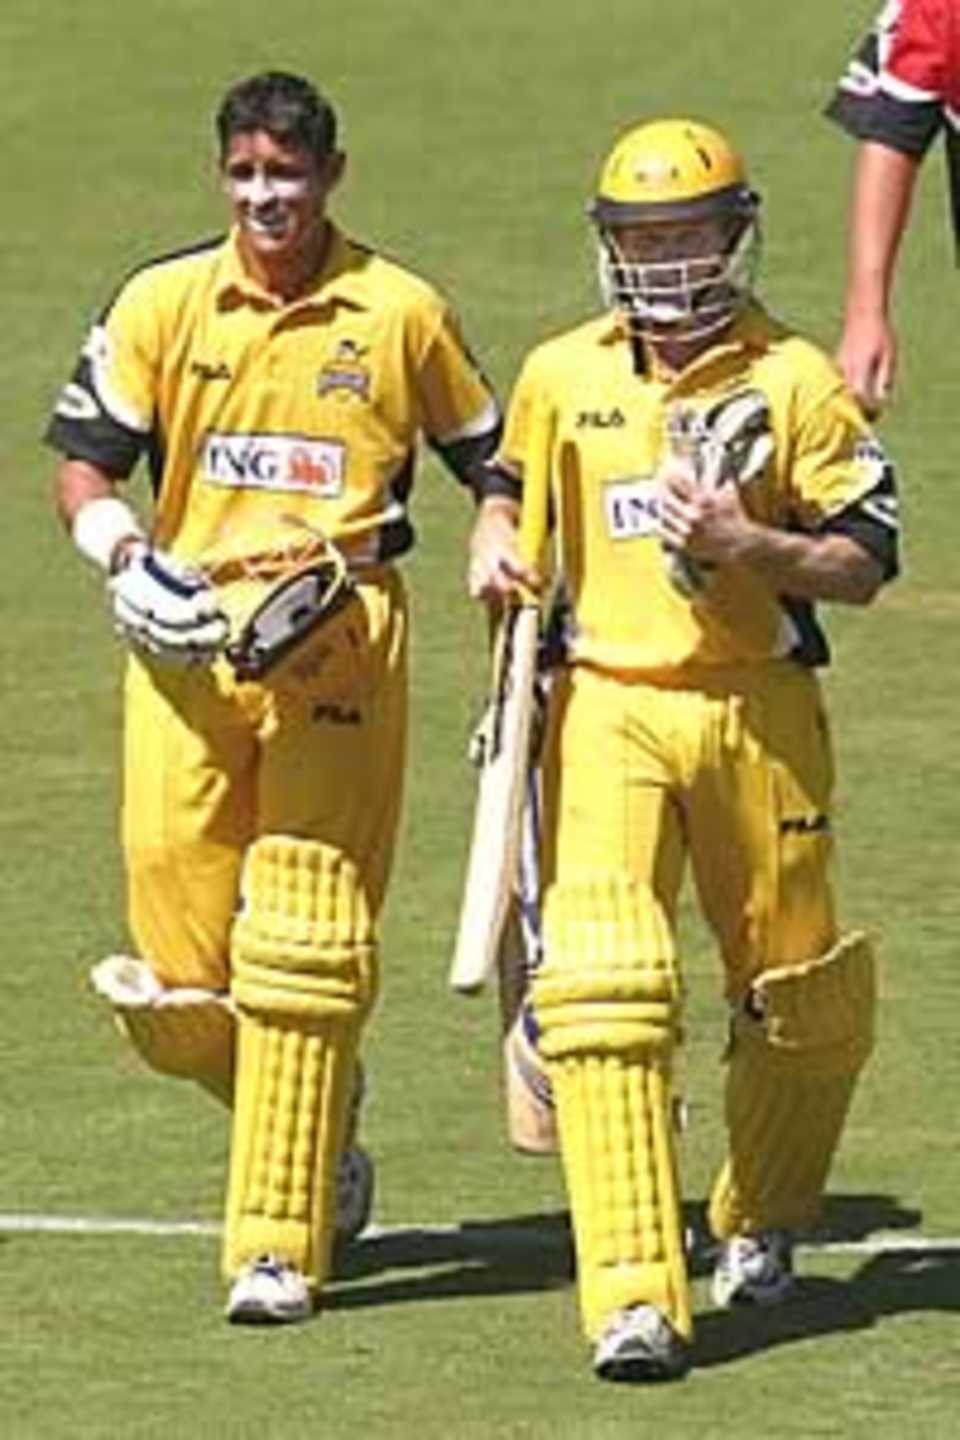 ADELAIDE - FEBRUARY 1: Michael Hussey of the Warriors (L) and Chris Rogers leave the field after the Warriors defeated the Redbacks by eight wickets in the ING Cup match between the Southern Redbacks and the Western Warriors played at Adelaide Oval in Adelaide, Australia on February 1, 2003.